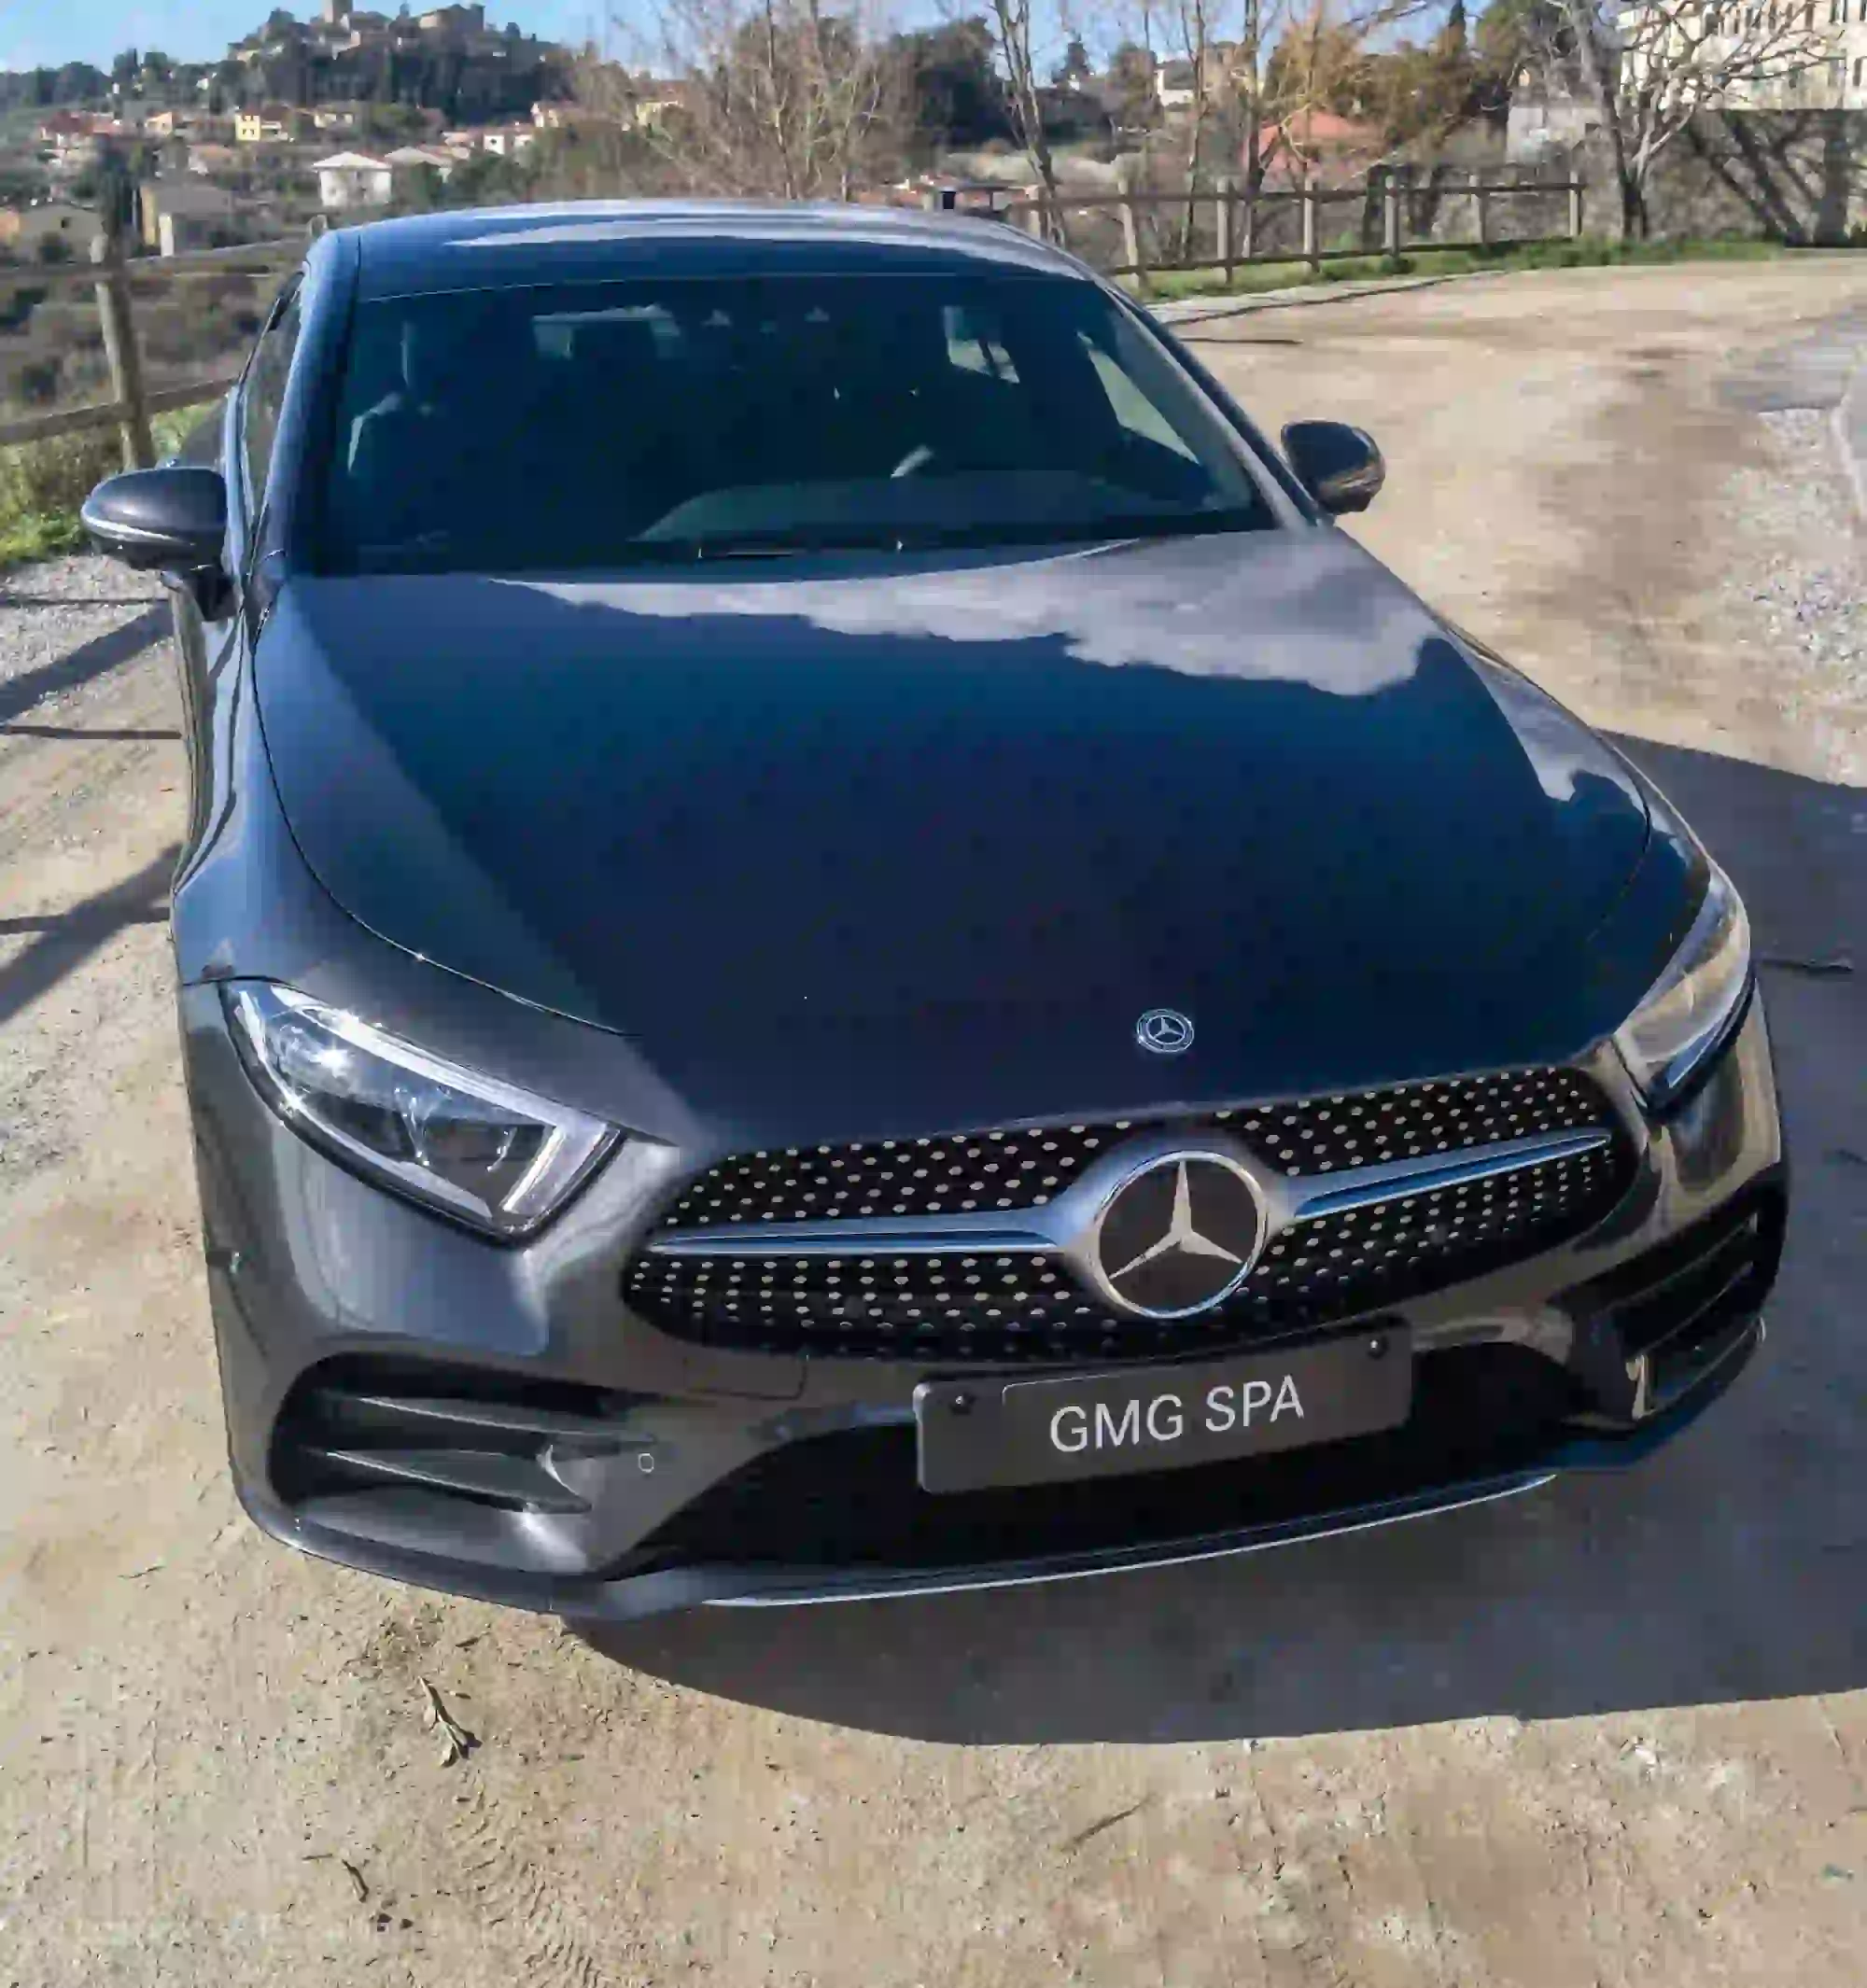 Nuova Mercedes CLS MY 2018 - Test Drive in Anteprima - 2